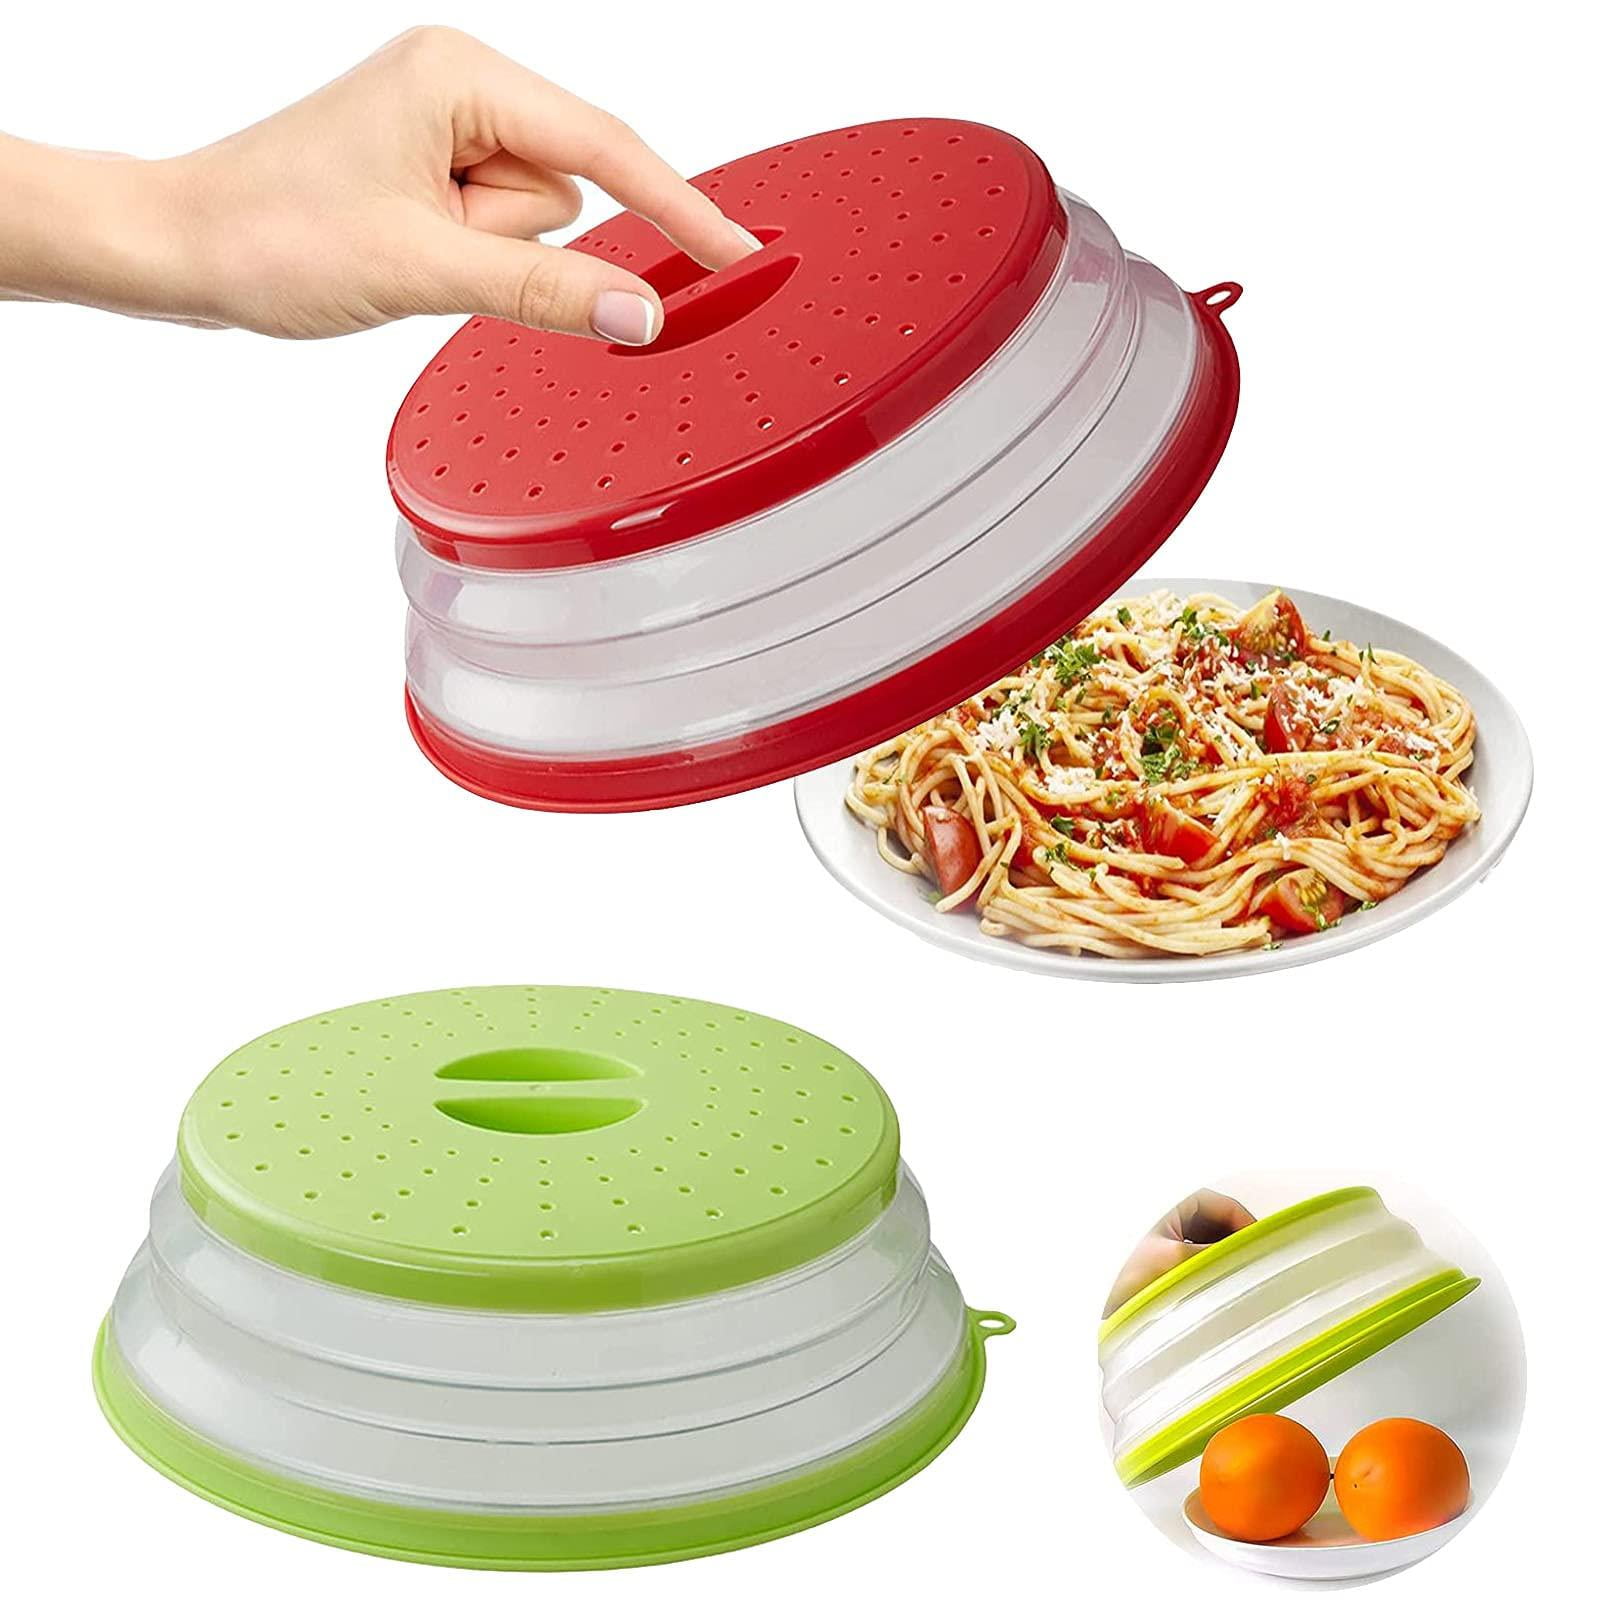 Microwave Cover Microwave Cover Foldable Microwave Lid with Hook Design Multi-Purpose Microwave Sleeve Collapsible Food Plate Cover BPA-Free & Non